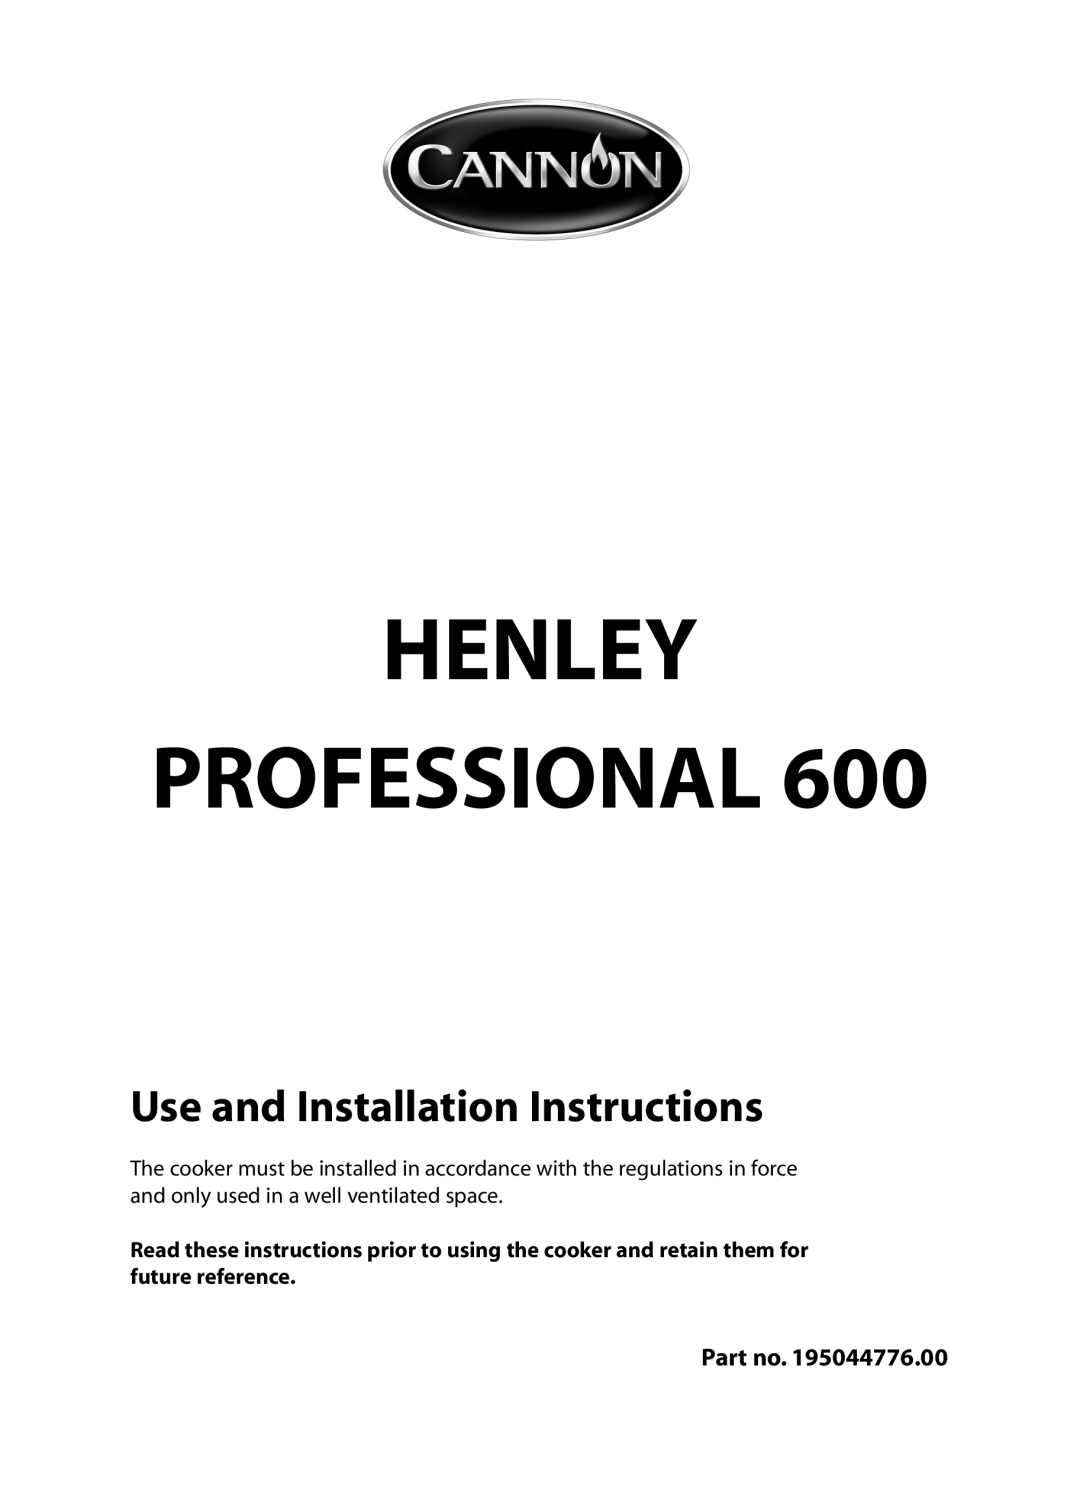 Cannon 10688 installation instructions Use and Installation Instructions, Henley Professional 